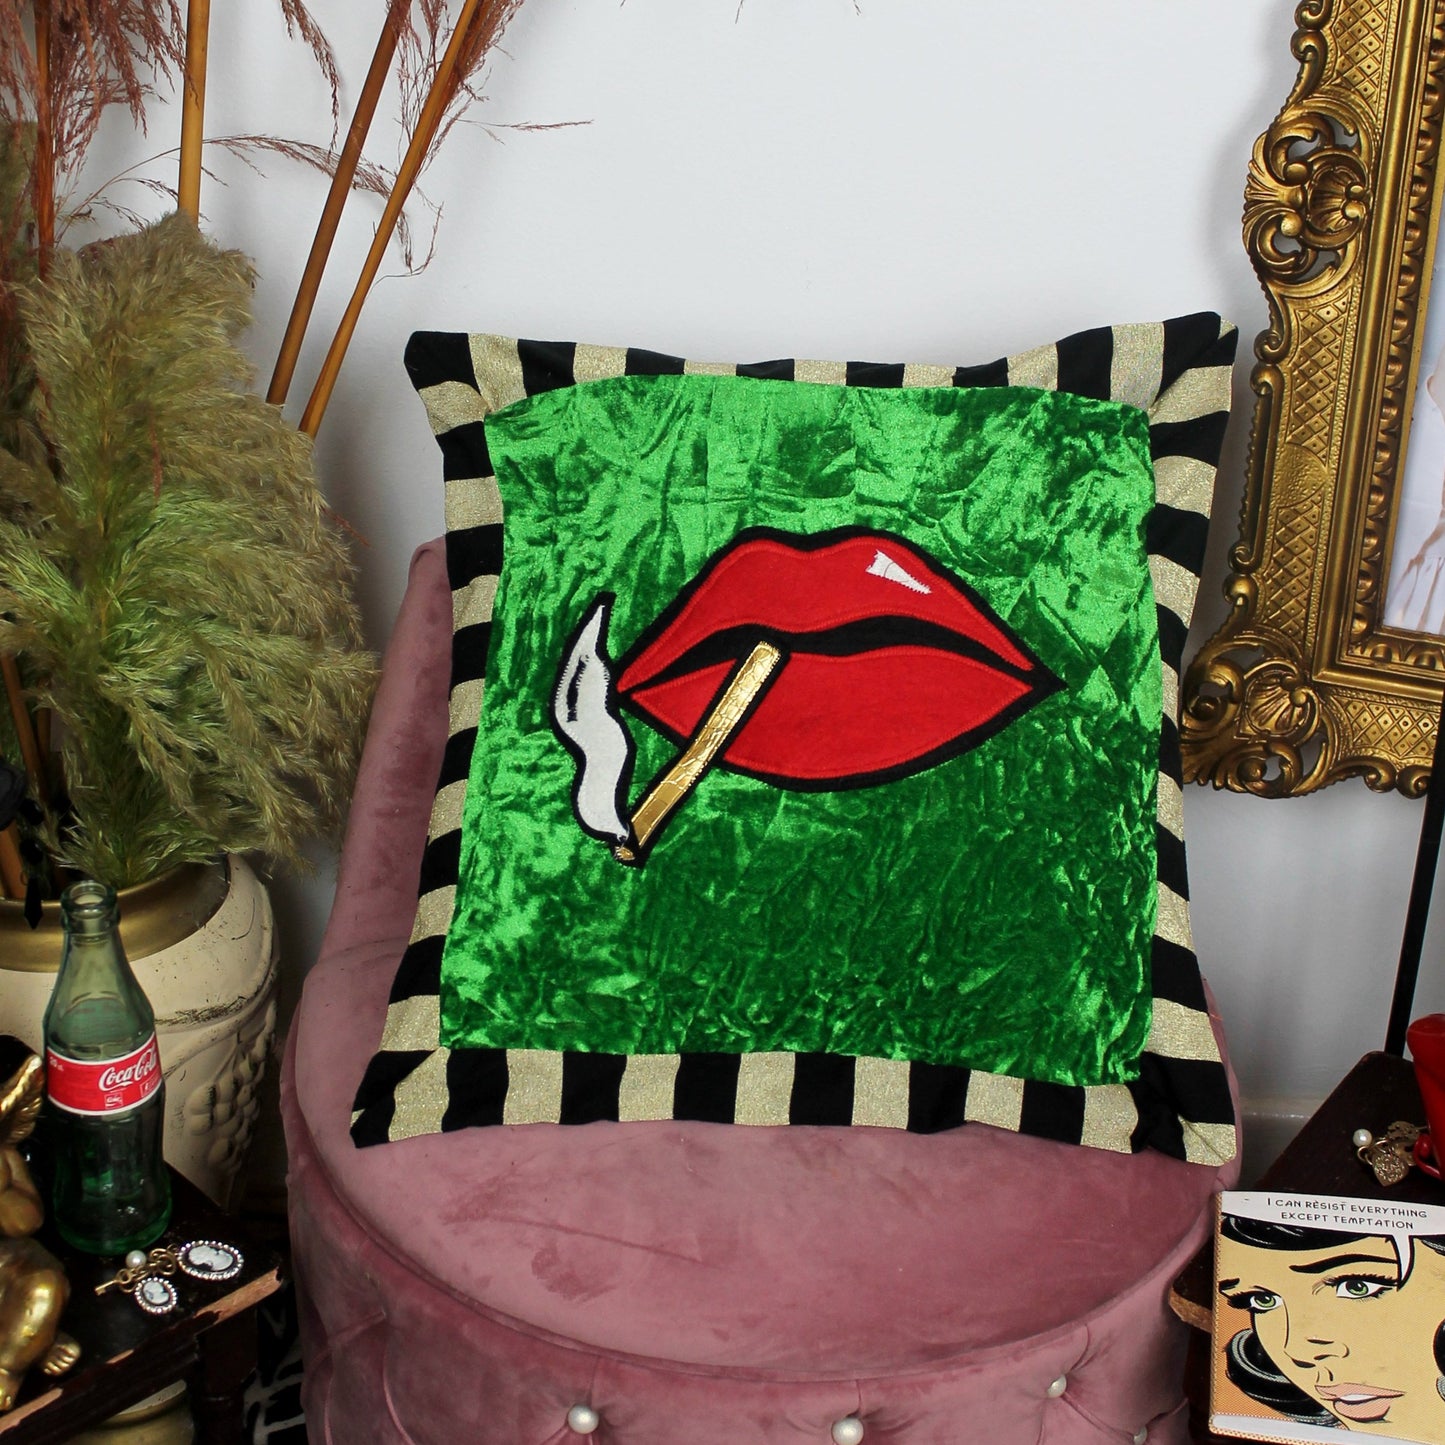 Absinth - Statement green and gold decorative throw cushion with red lips